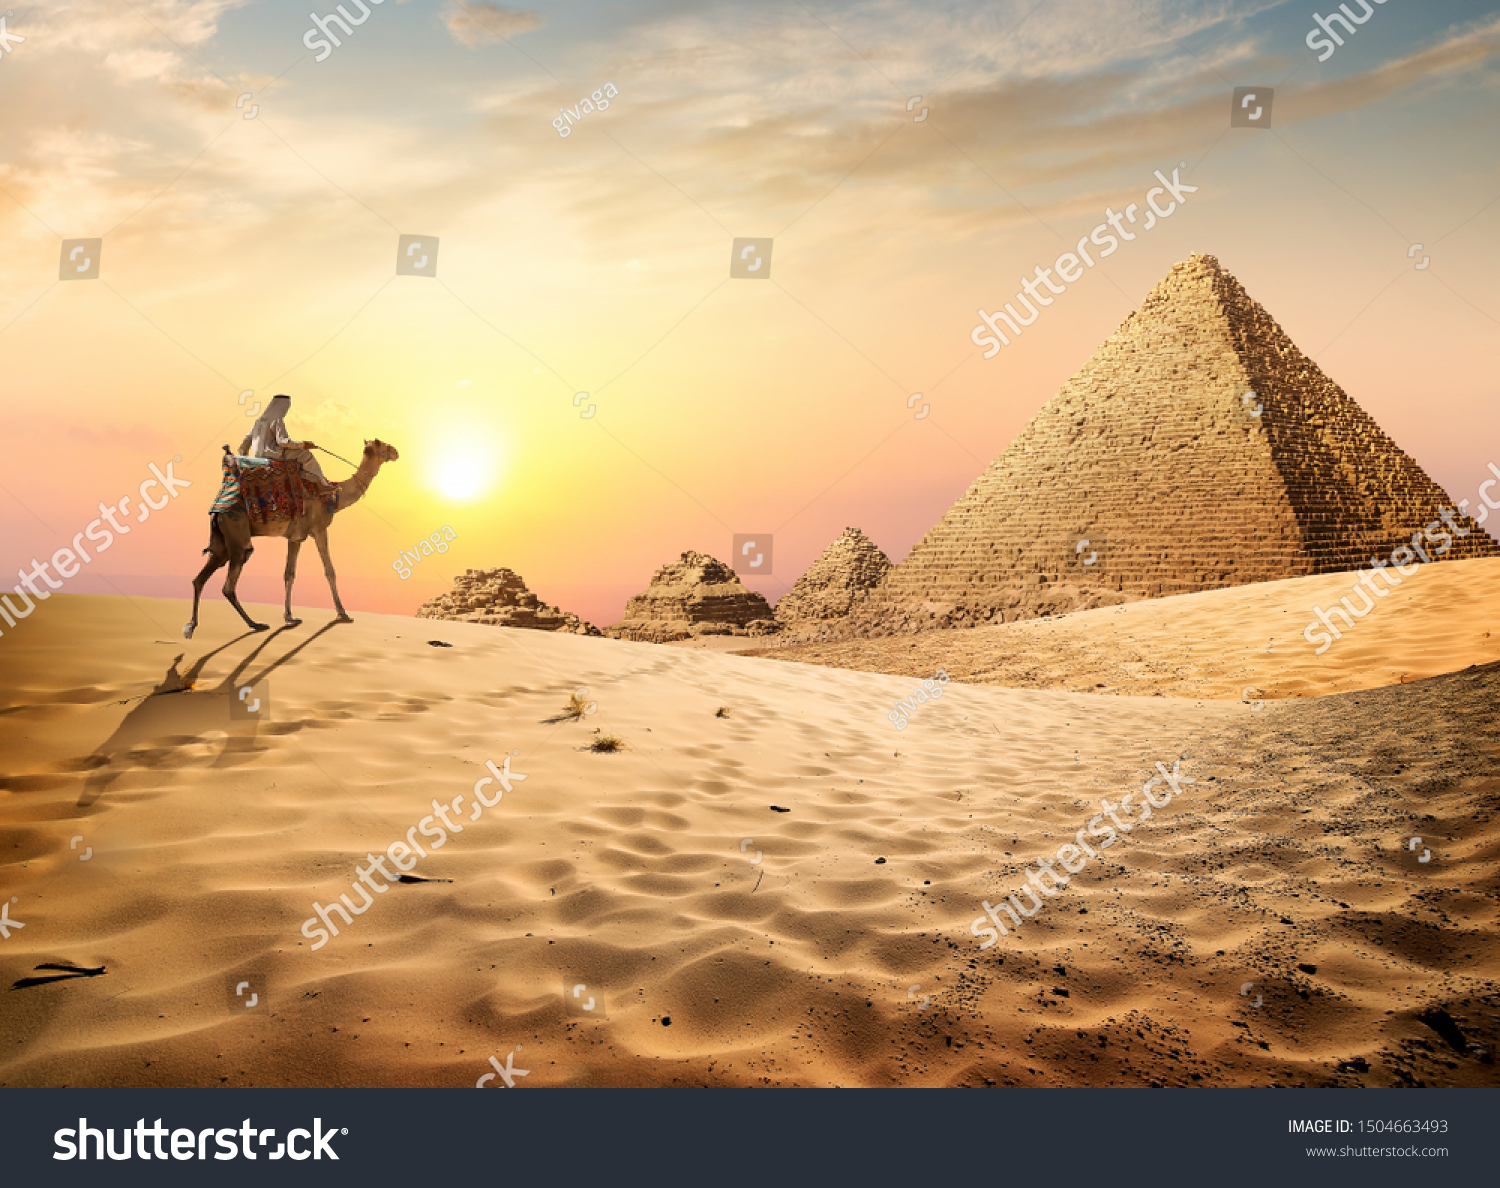 Egyptian pyramids in the desert at sunset #1504663493